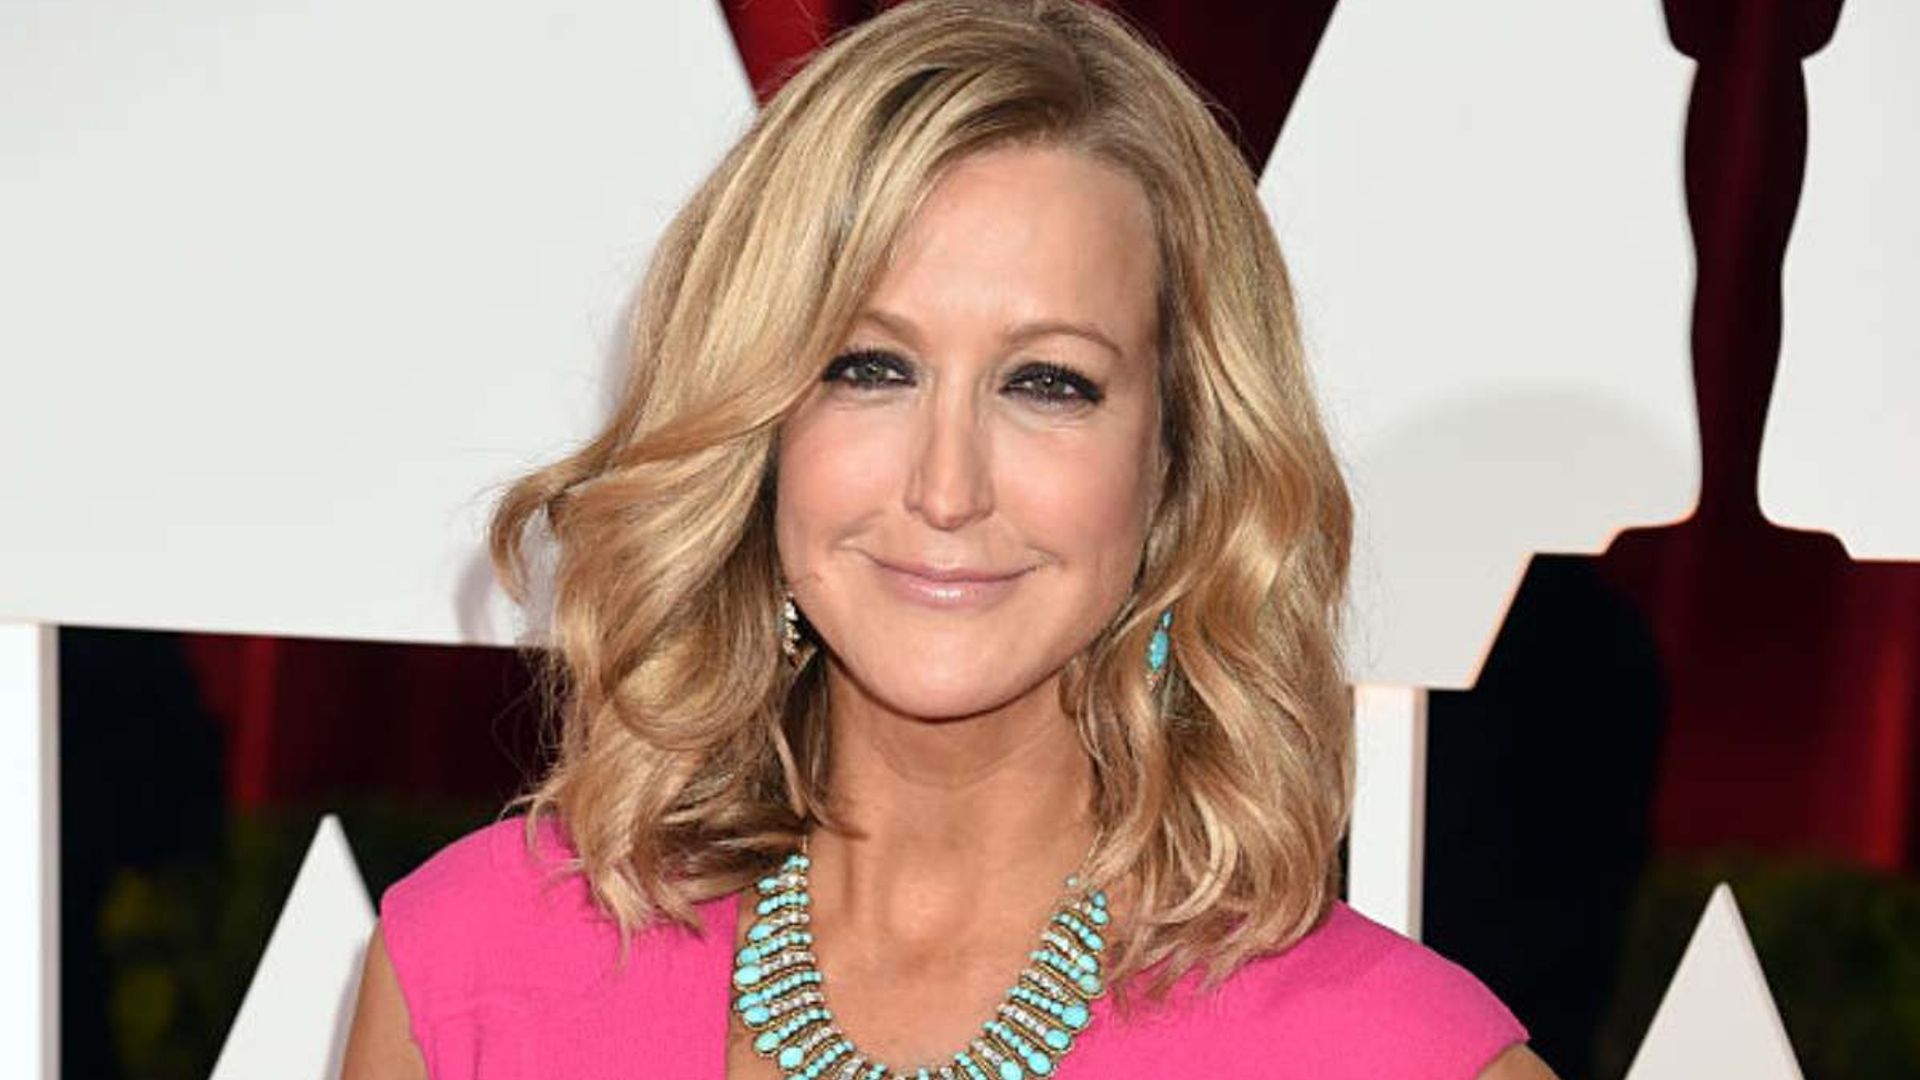 Lara Spencer hits the dance floor in a hot pink mini dress for fun-filled celebration